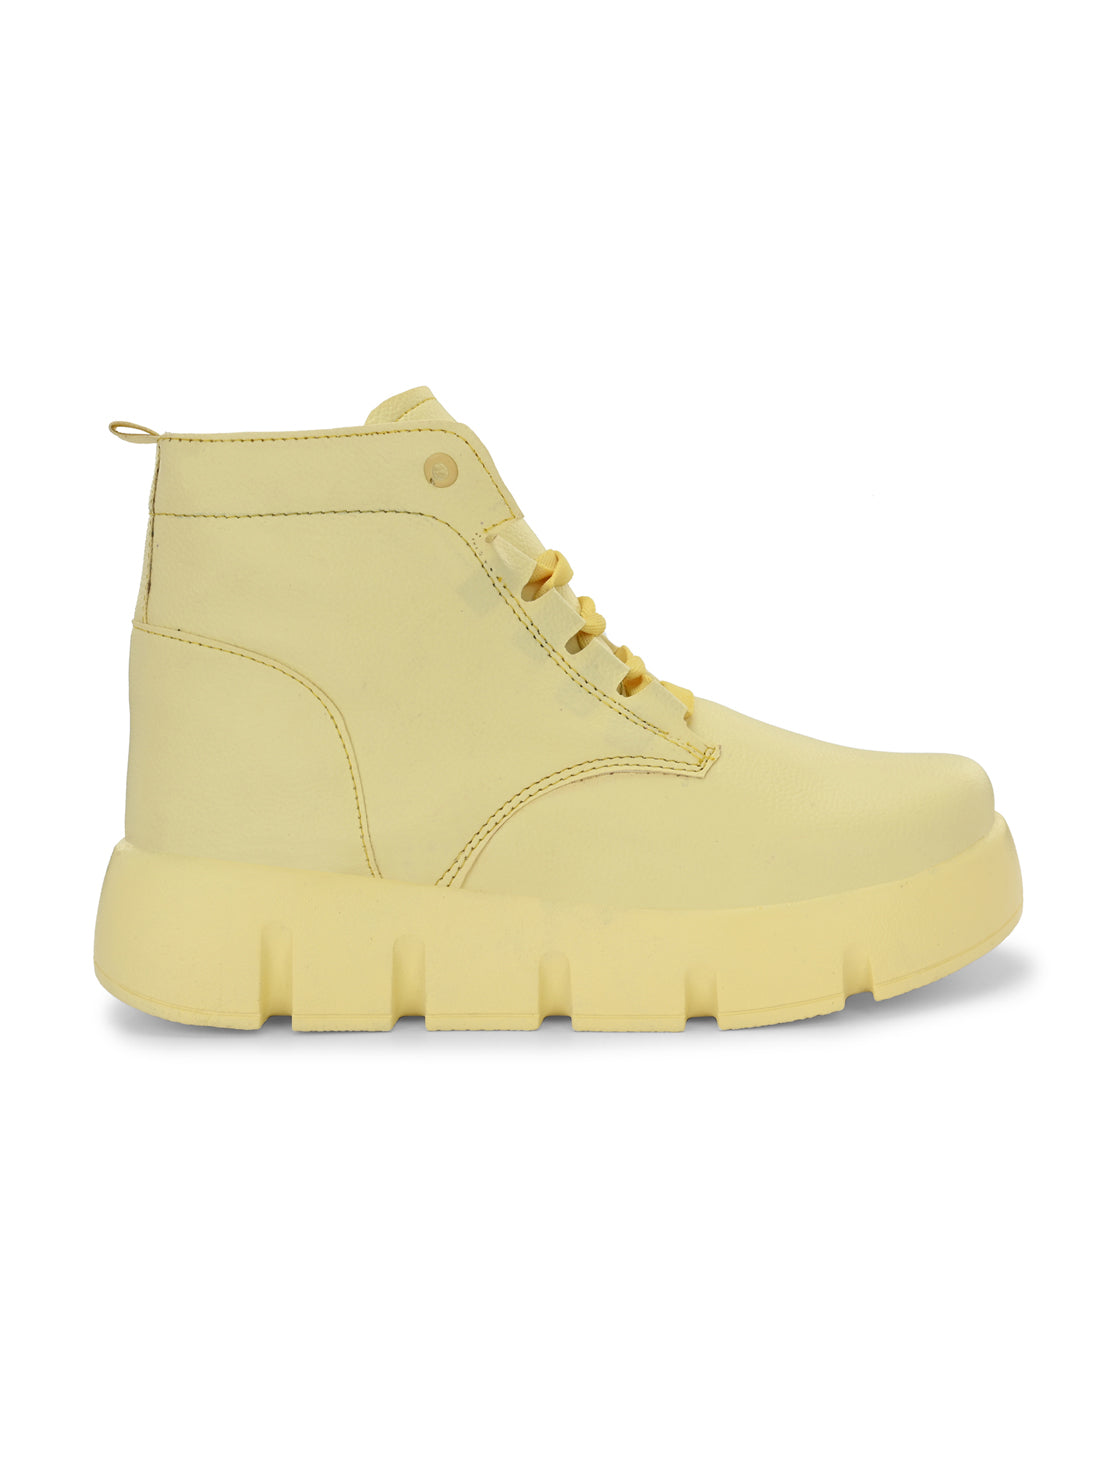 Hirolas® Women Yellow Chunky Casual Lace-Up Ankle HighBoots (HRLWF18YLW)